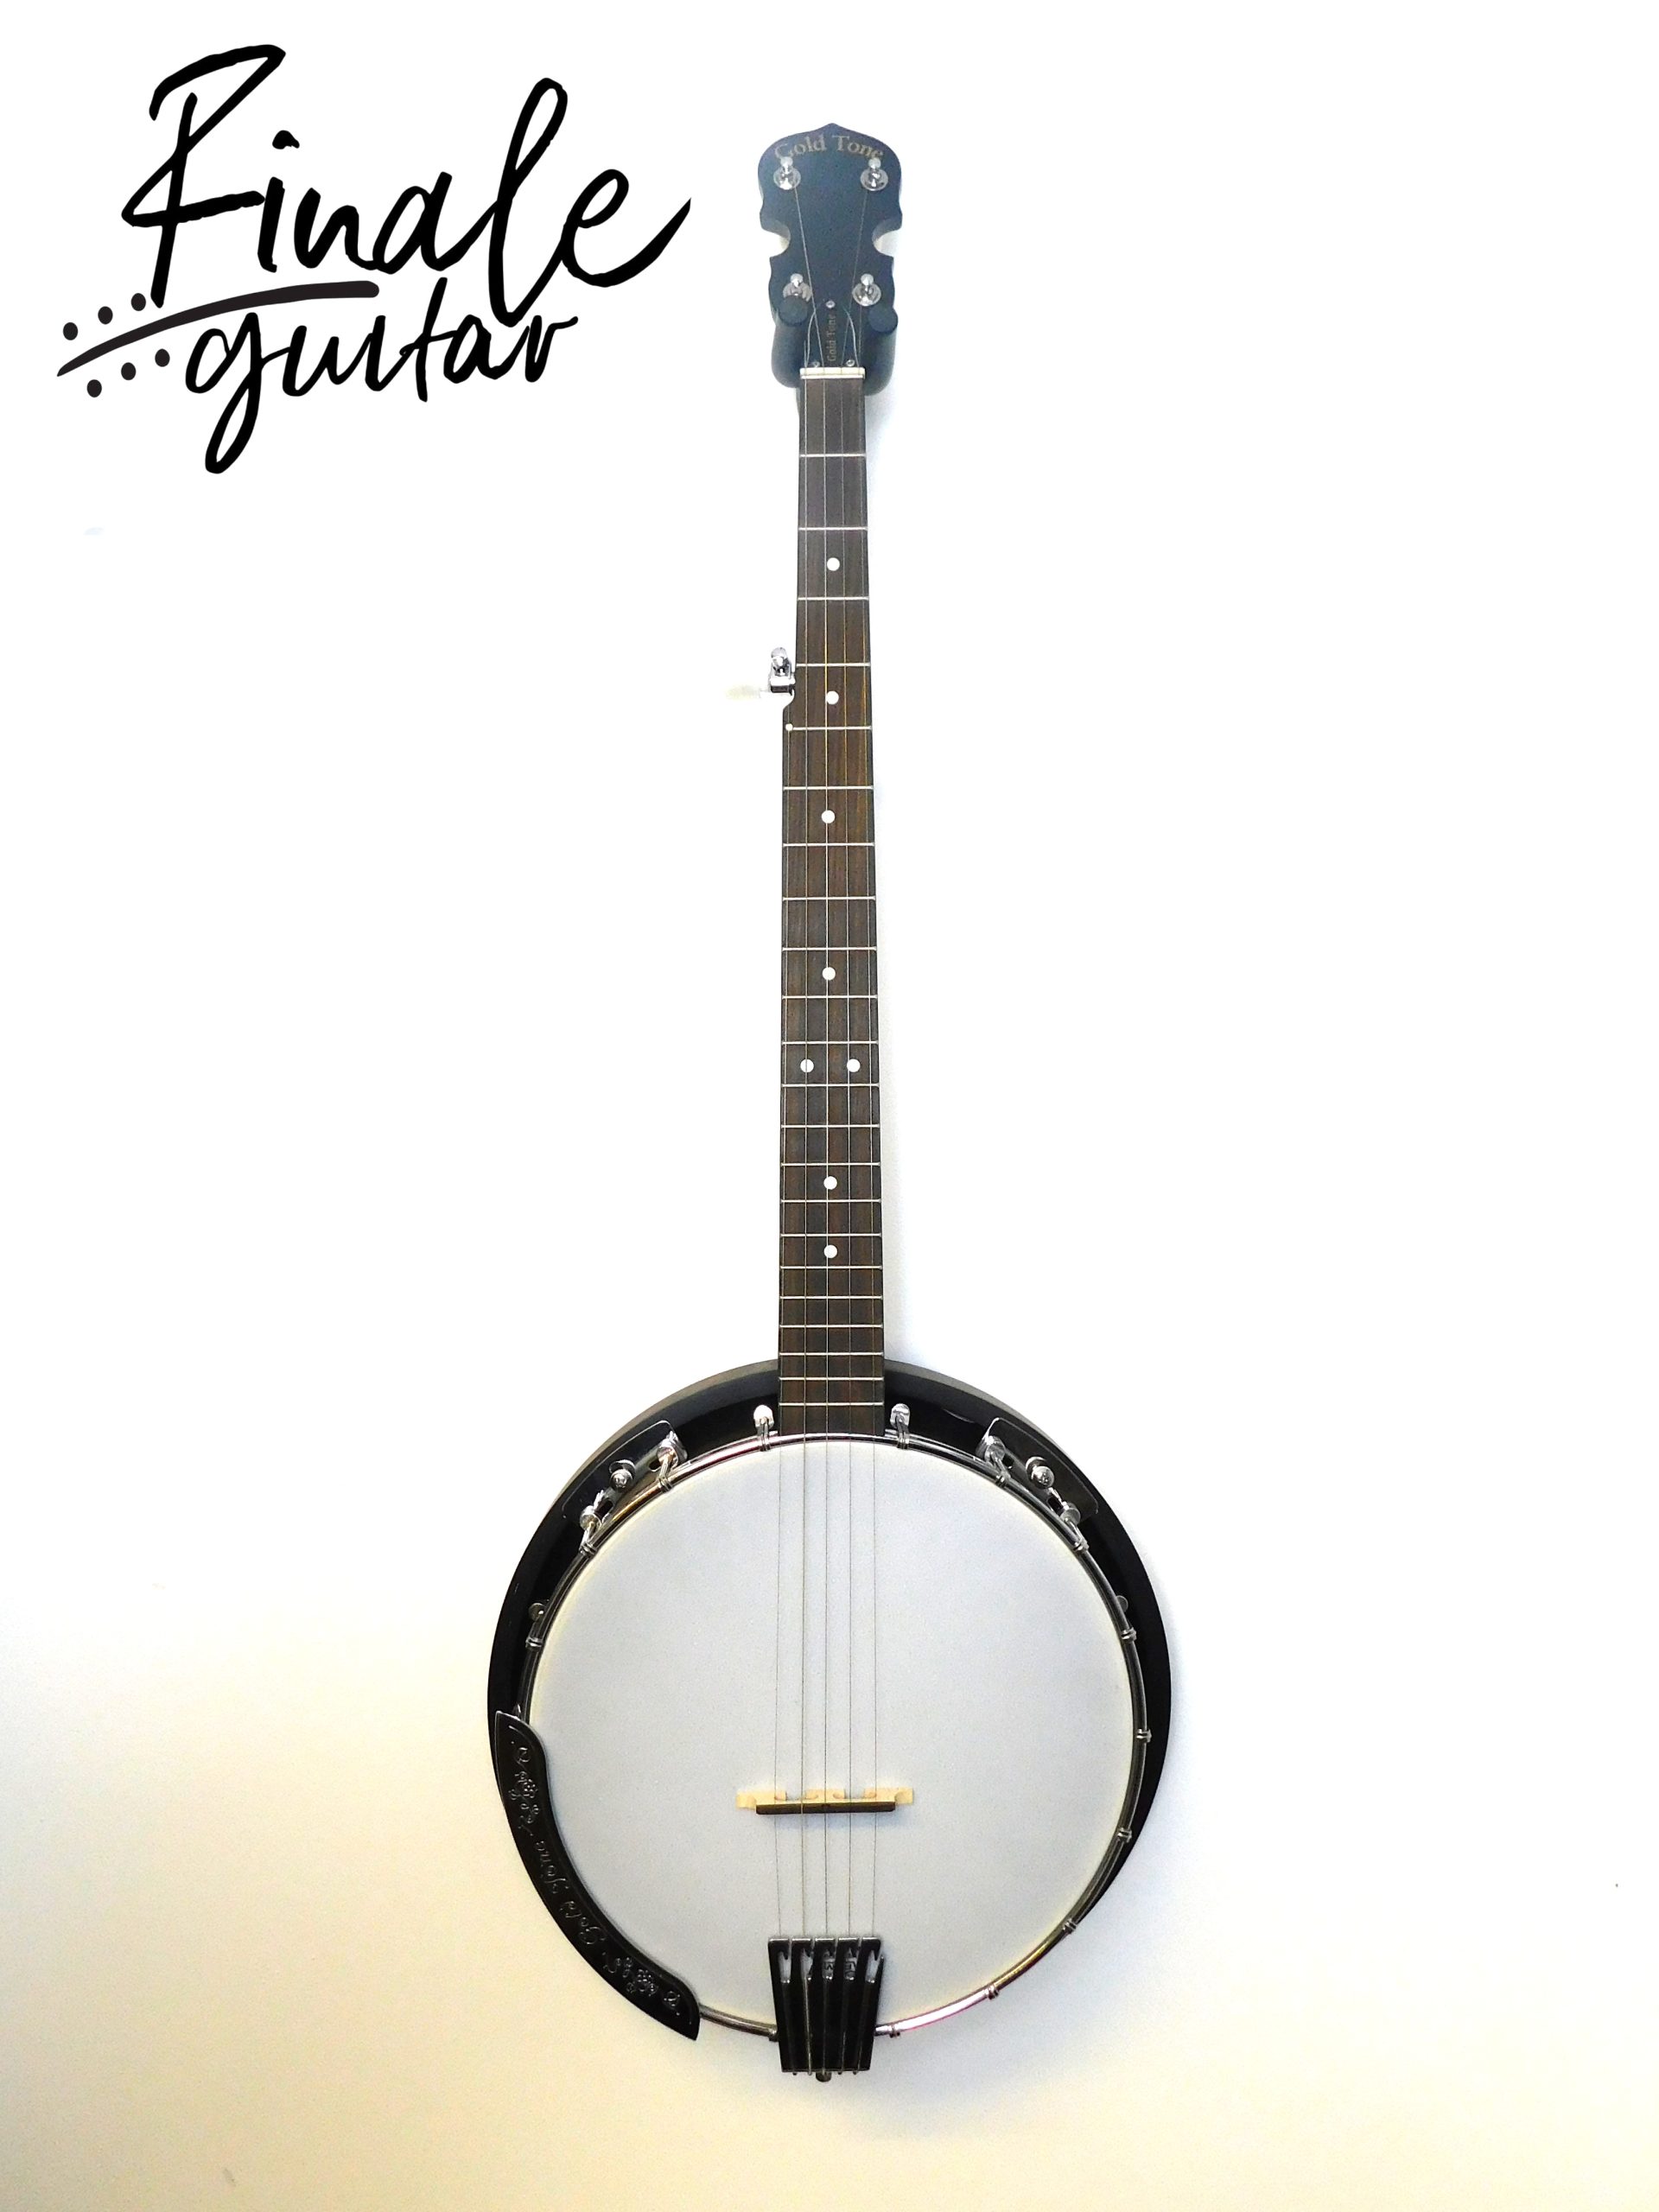 GoldTone CC-50RP as new 5 string banjo for sale in our Sheffield guitar shop, Finale Guitar